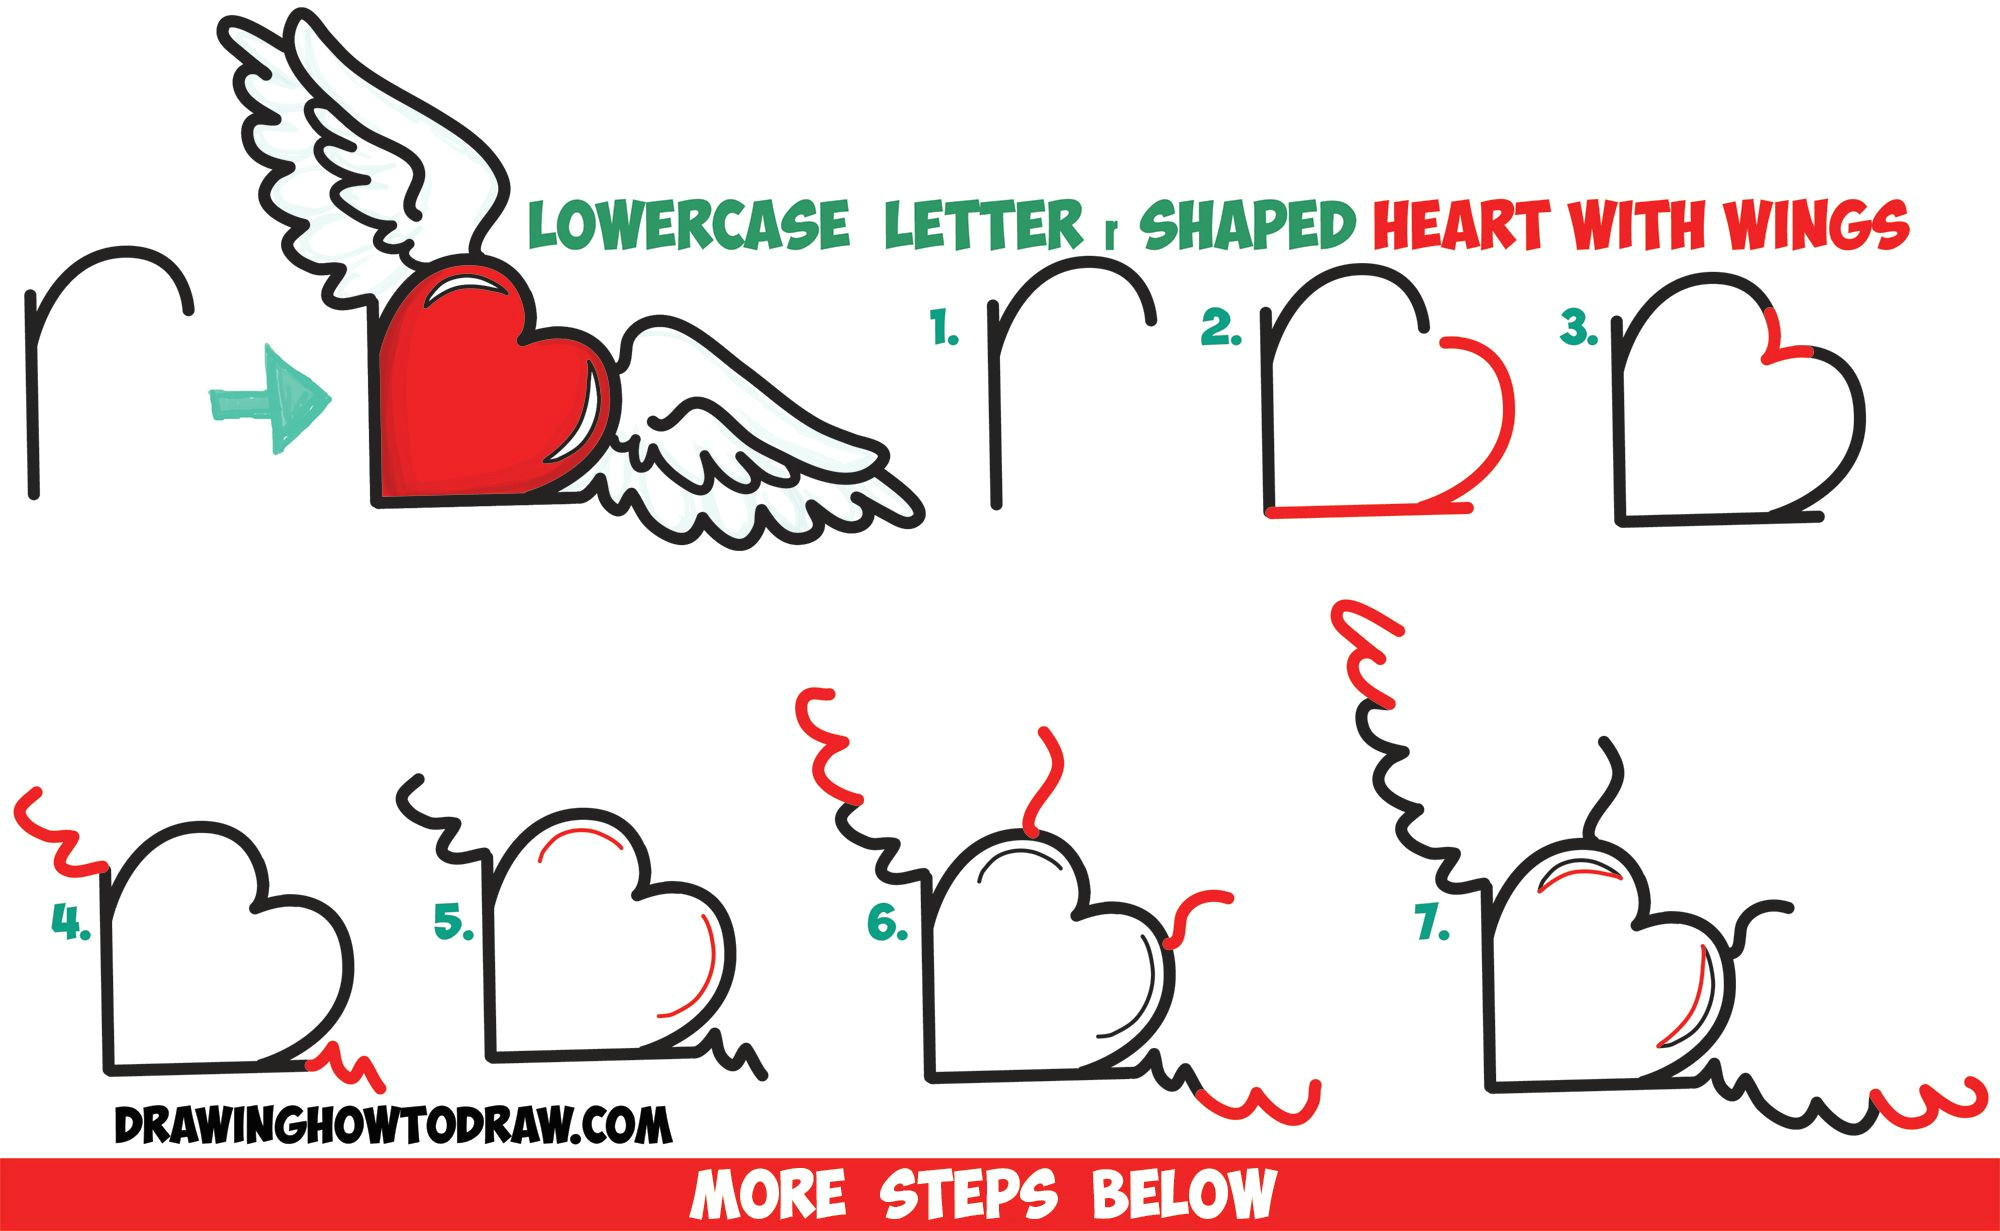 Easy Way Of Drawing A Heart How to Draw Heart with Wings From Lowercase Letter R Shapes Easy